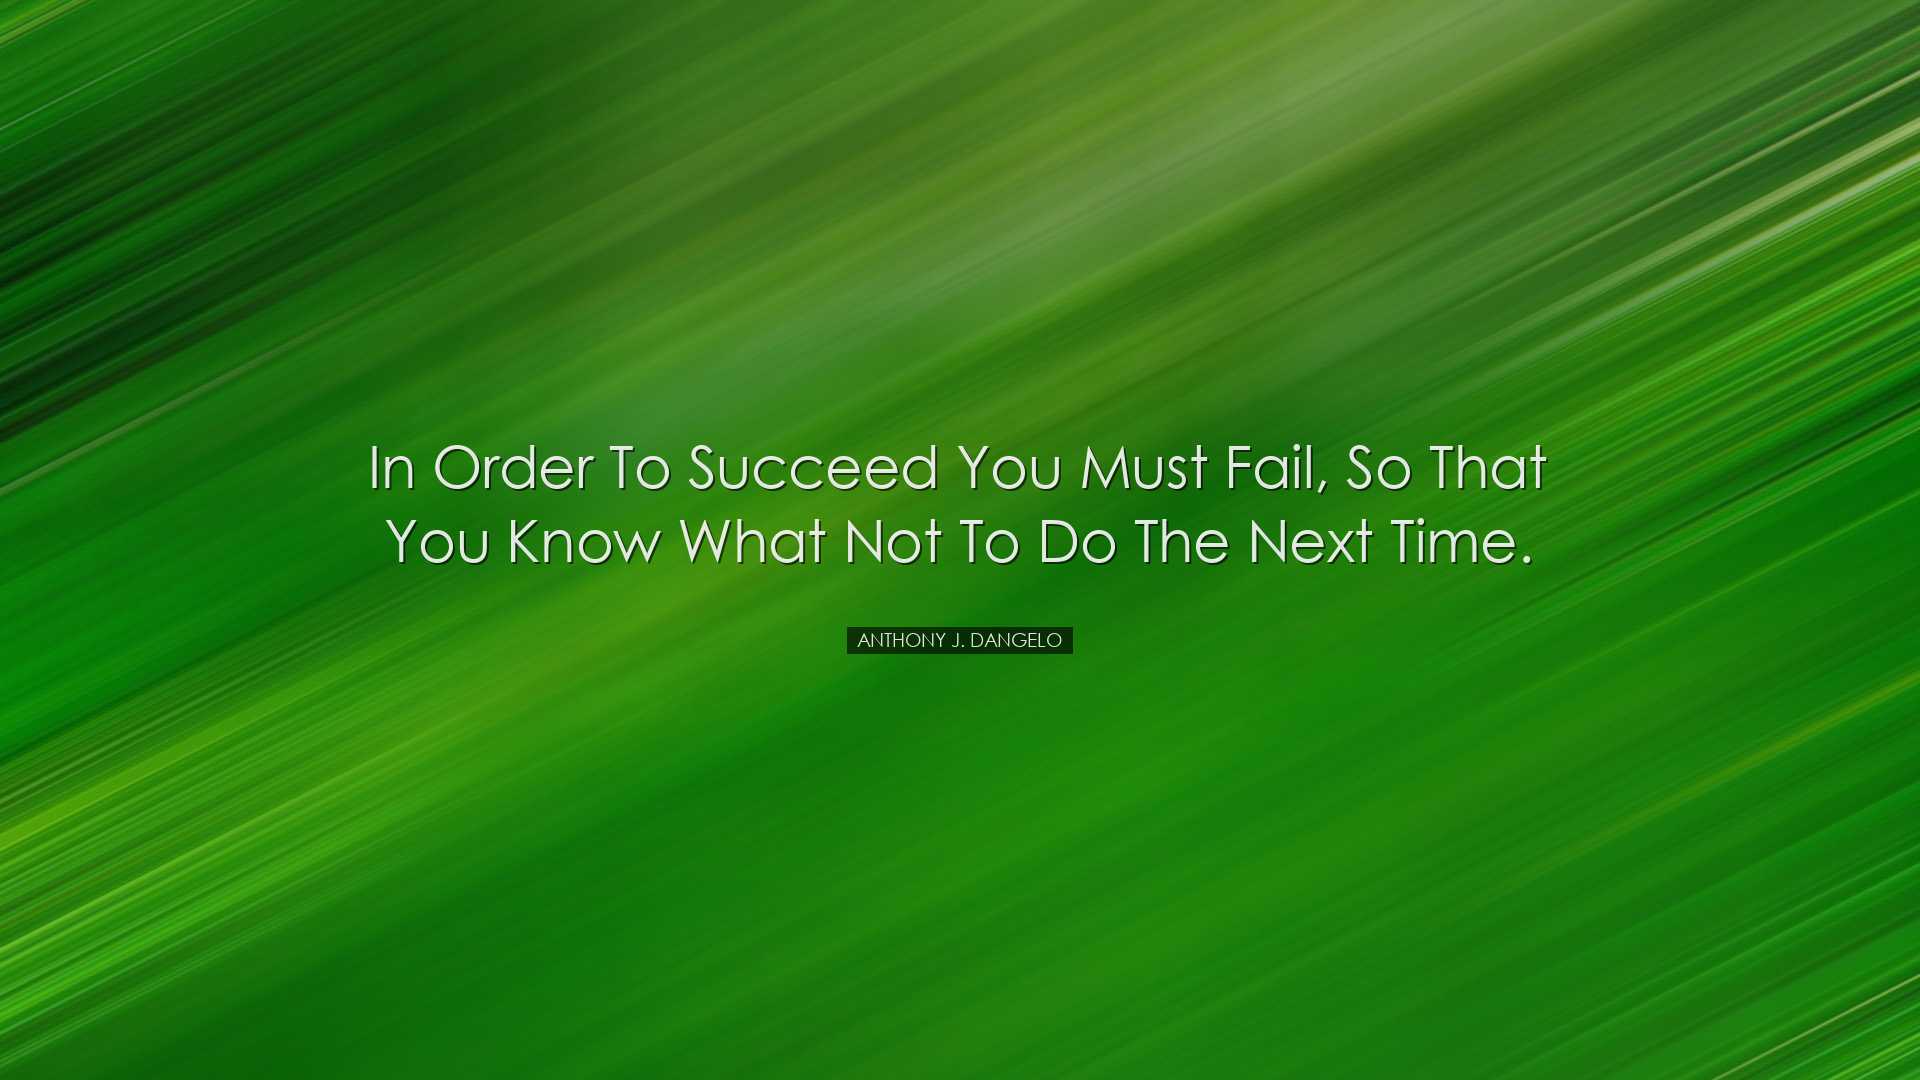 In order to succeed you must fail, so that you know what not to do